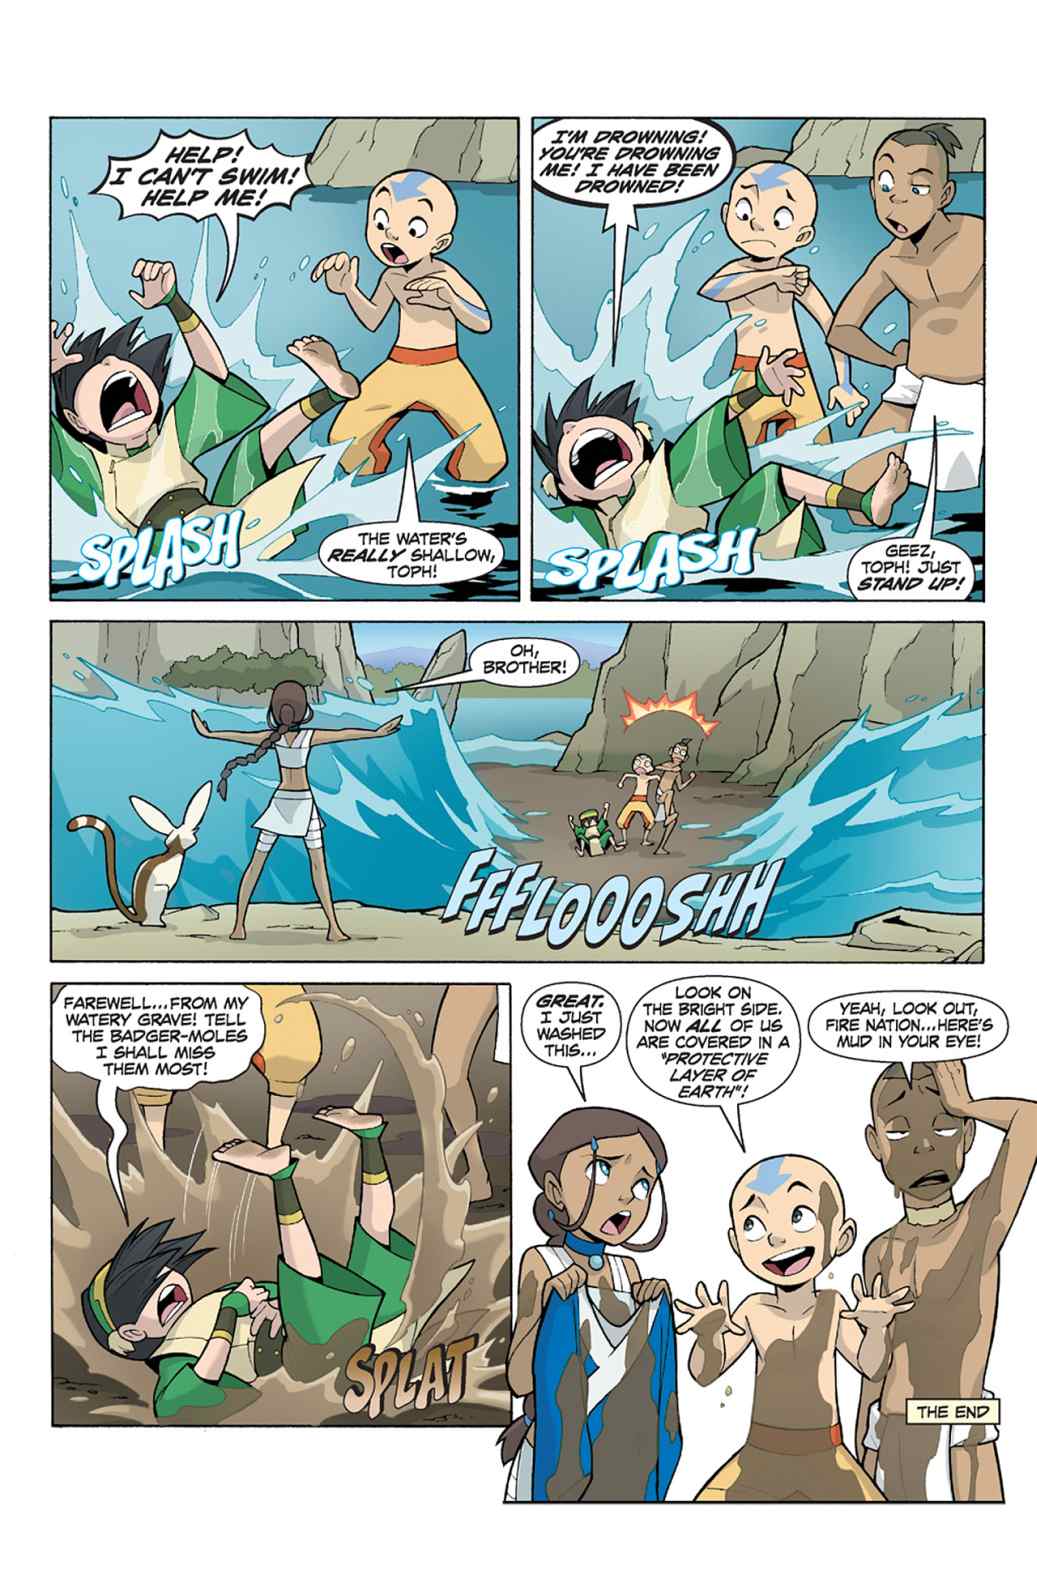 Read Comics Online Free - Avatar The Last Airbender Comic Book Issue  # - Page 16